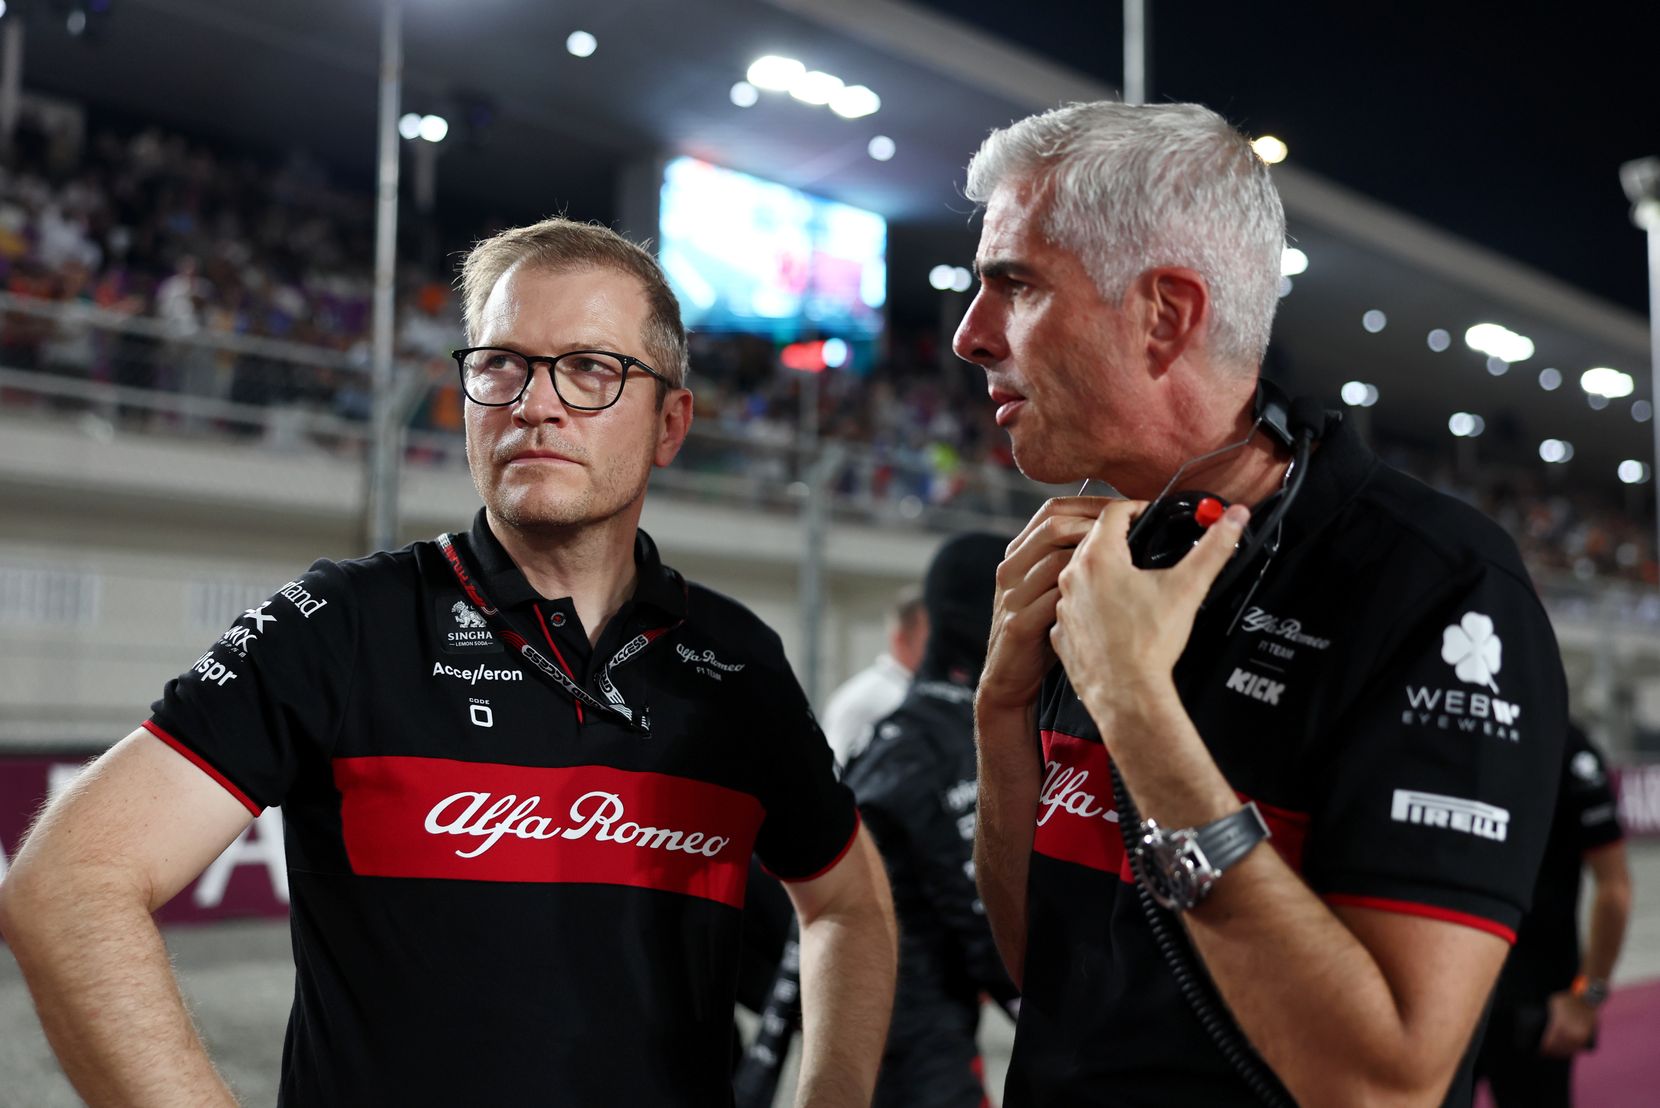 Andreas Seidl (GER) Sauber Group Chief Executive Officer with Alessandro Alunni Bravi (ITA) Alfa Romeo F1 Team Managing Director and Team Representative on the grid.